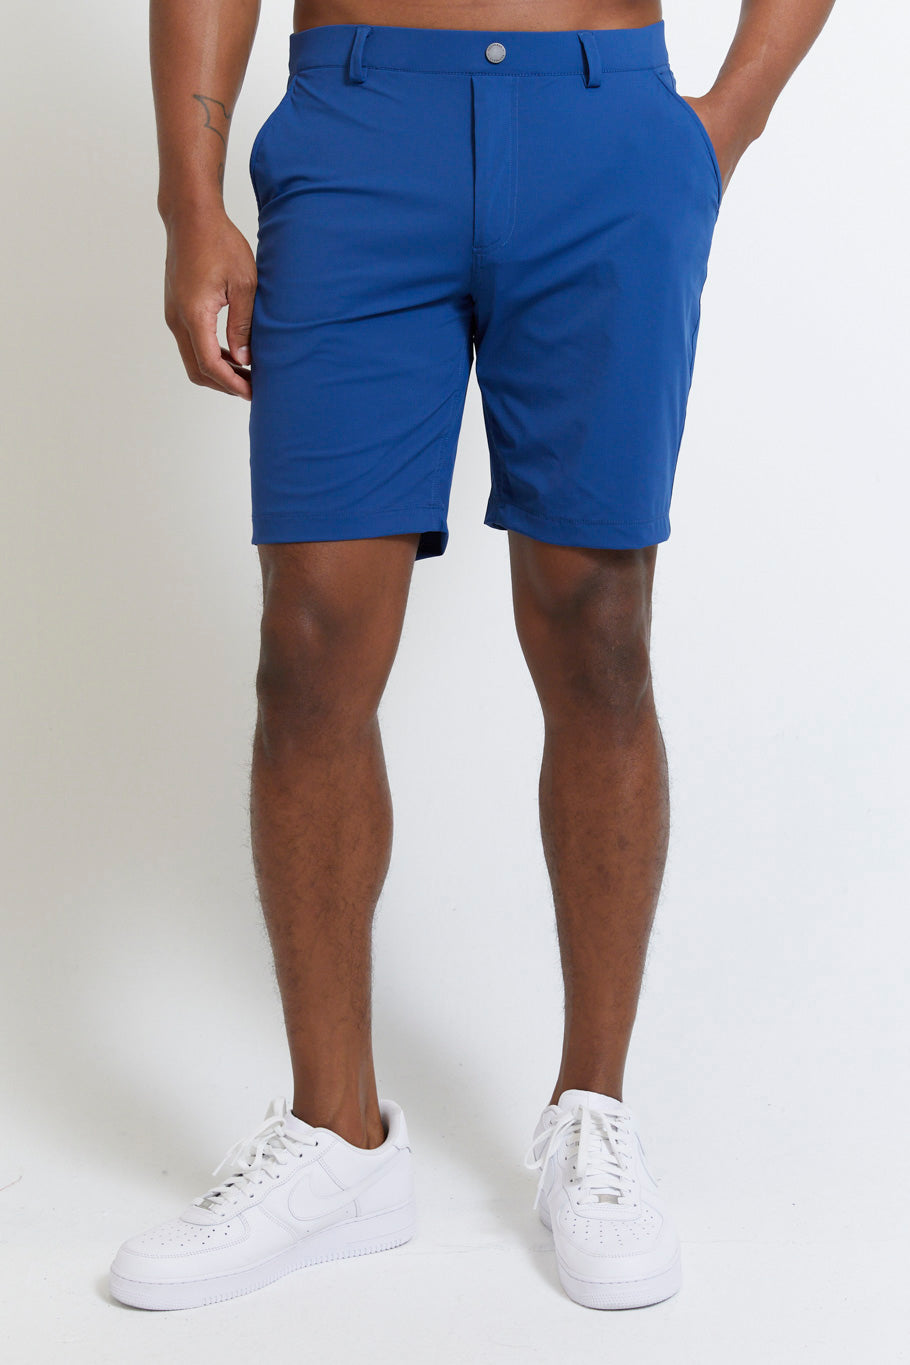 Image of the hanover pull-on short in admiral